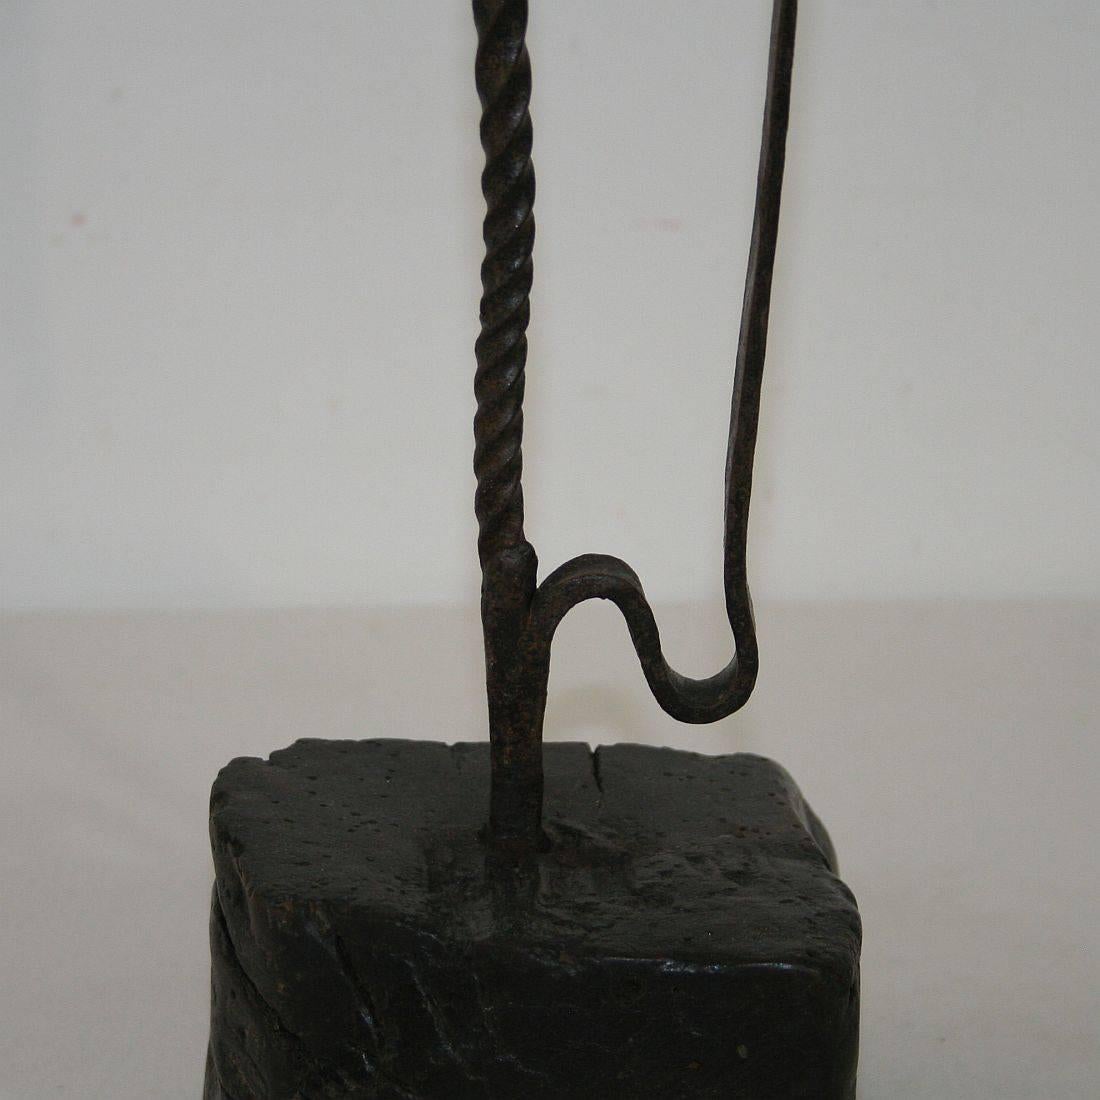 Primitive French 17th-18th Century Wrought Iron Candleholder 2